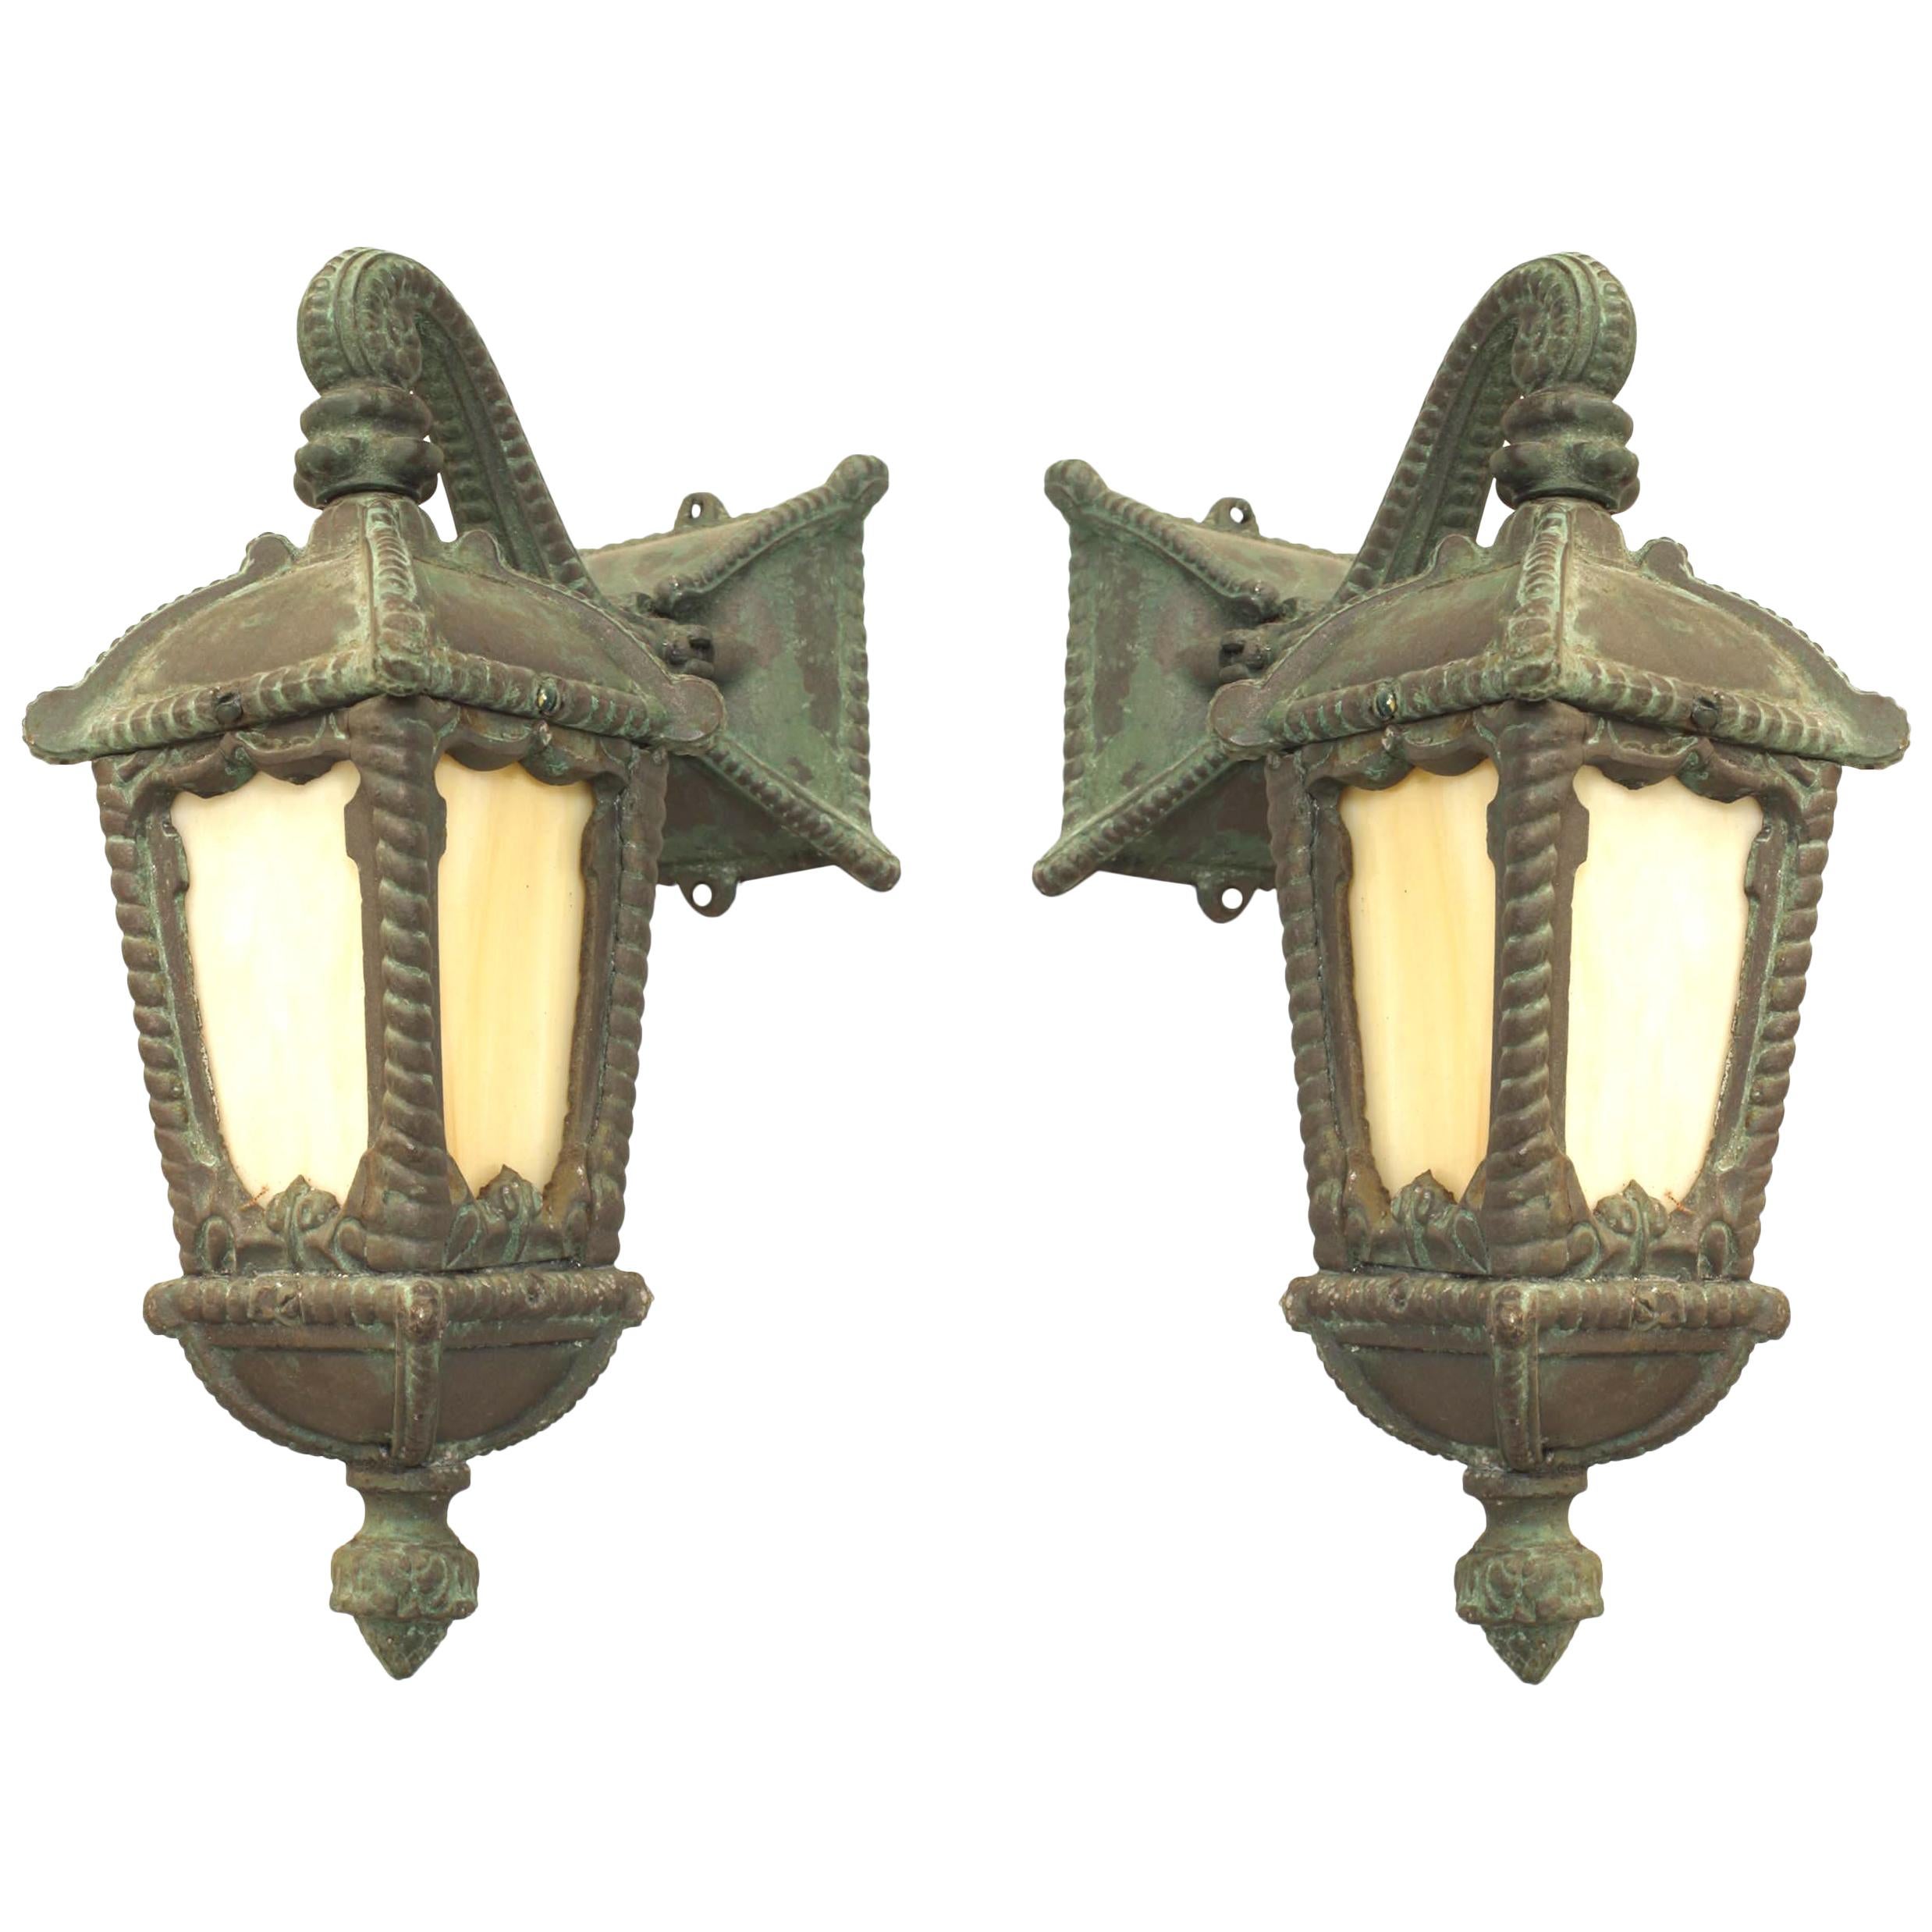 Pair of American Victorian Patinated Iron Outdoor Lantern Sconces